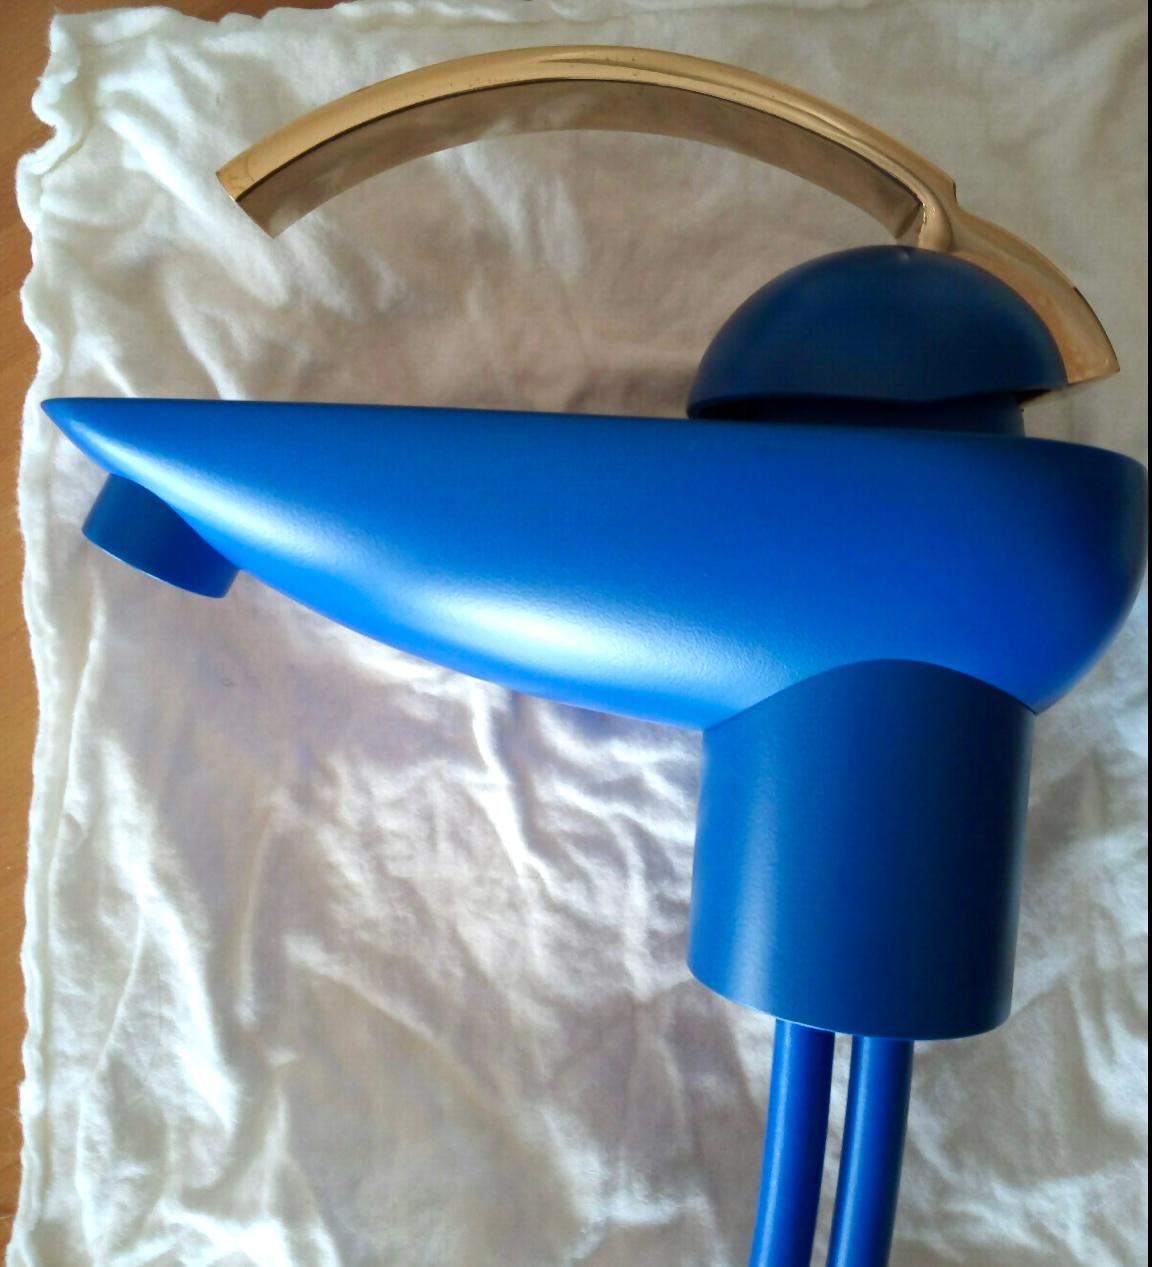 Dornbracht Obina royal blue, gold Lavatory single-hole Deckmount Faucet, 1990s. Gorgeous vibrant blue, rare postmodern piece by Dornbracht, Customizable, gold handle can theoretically be swapped out. Comes in original box with original packaging